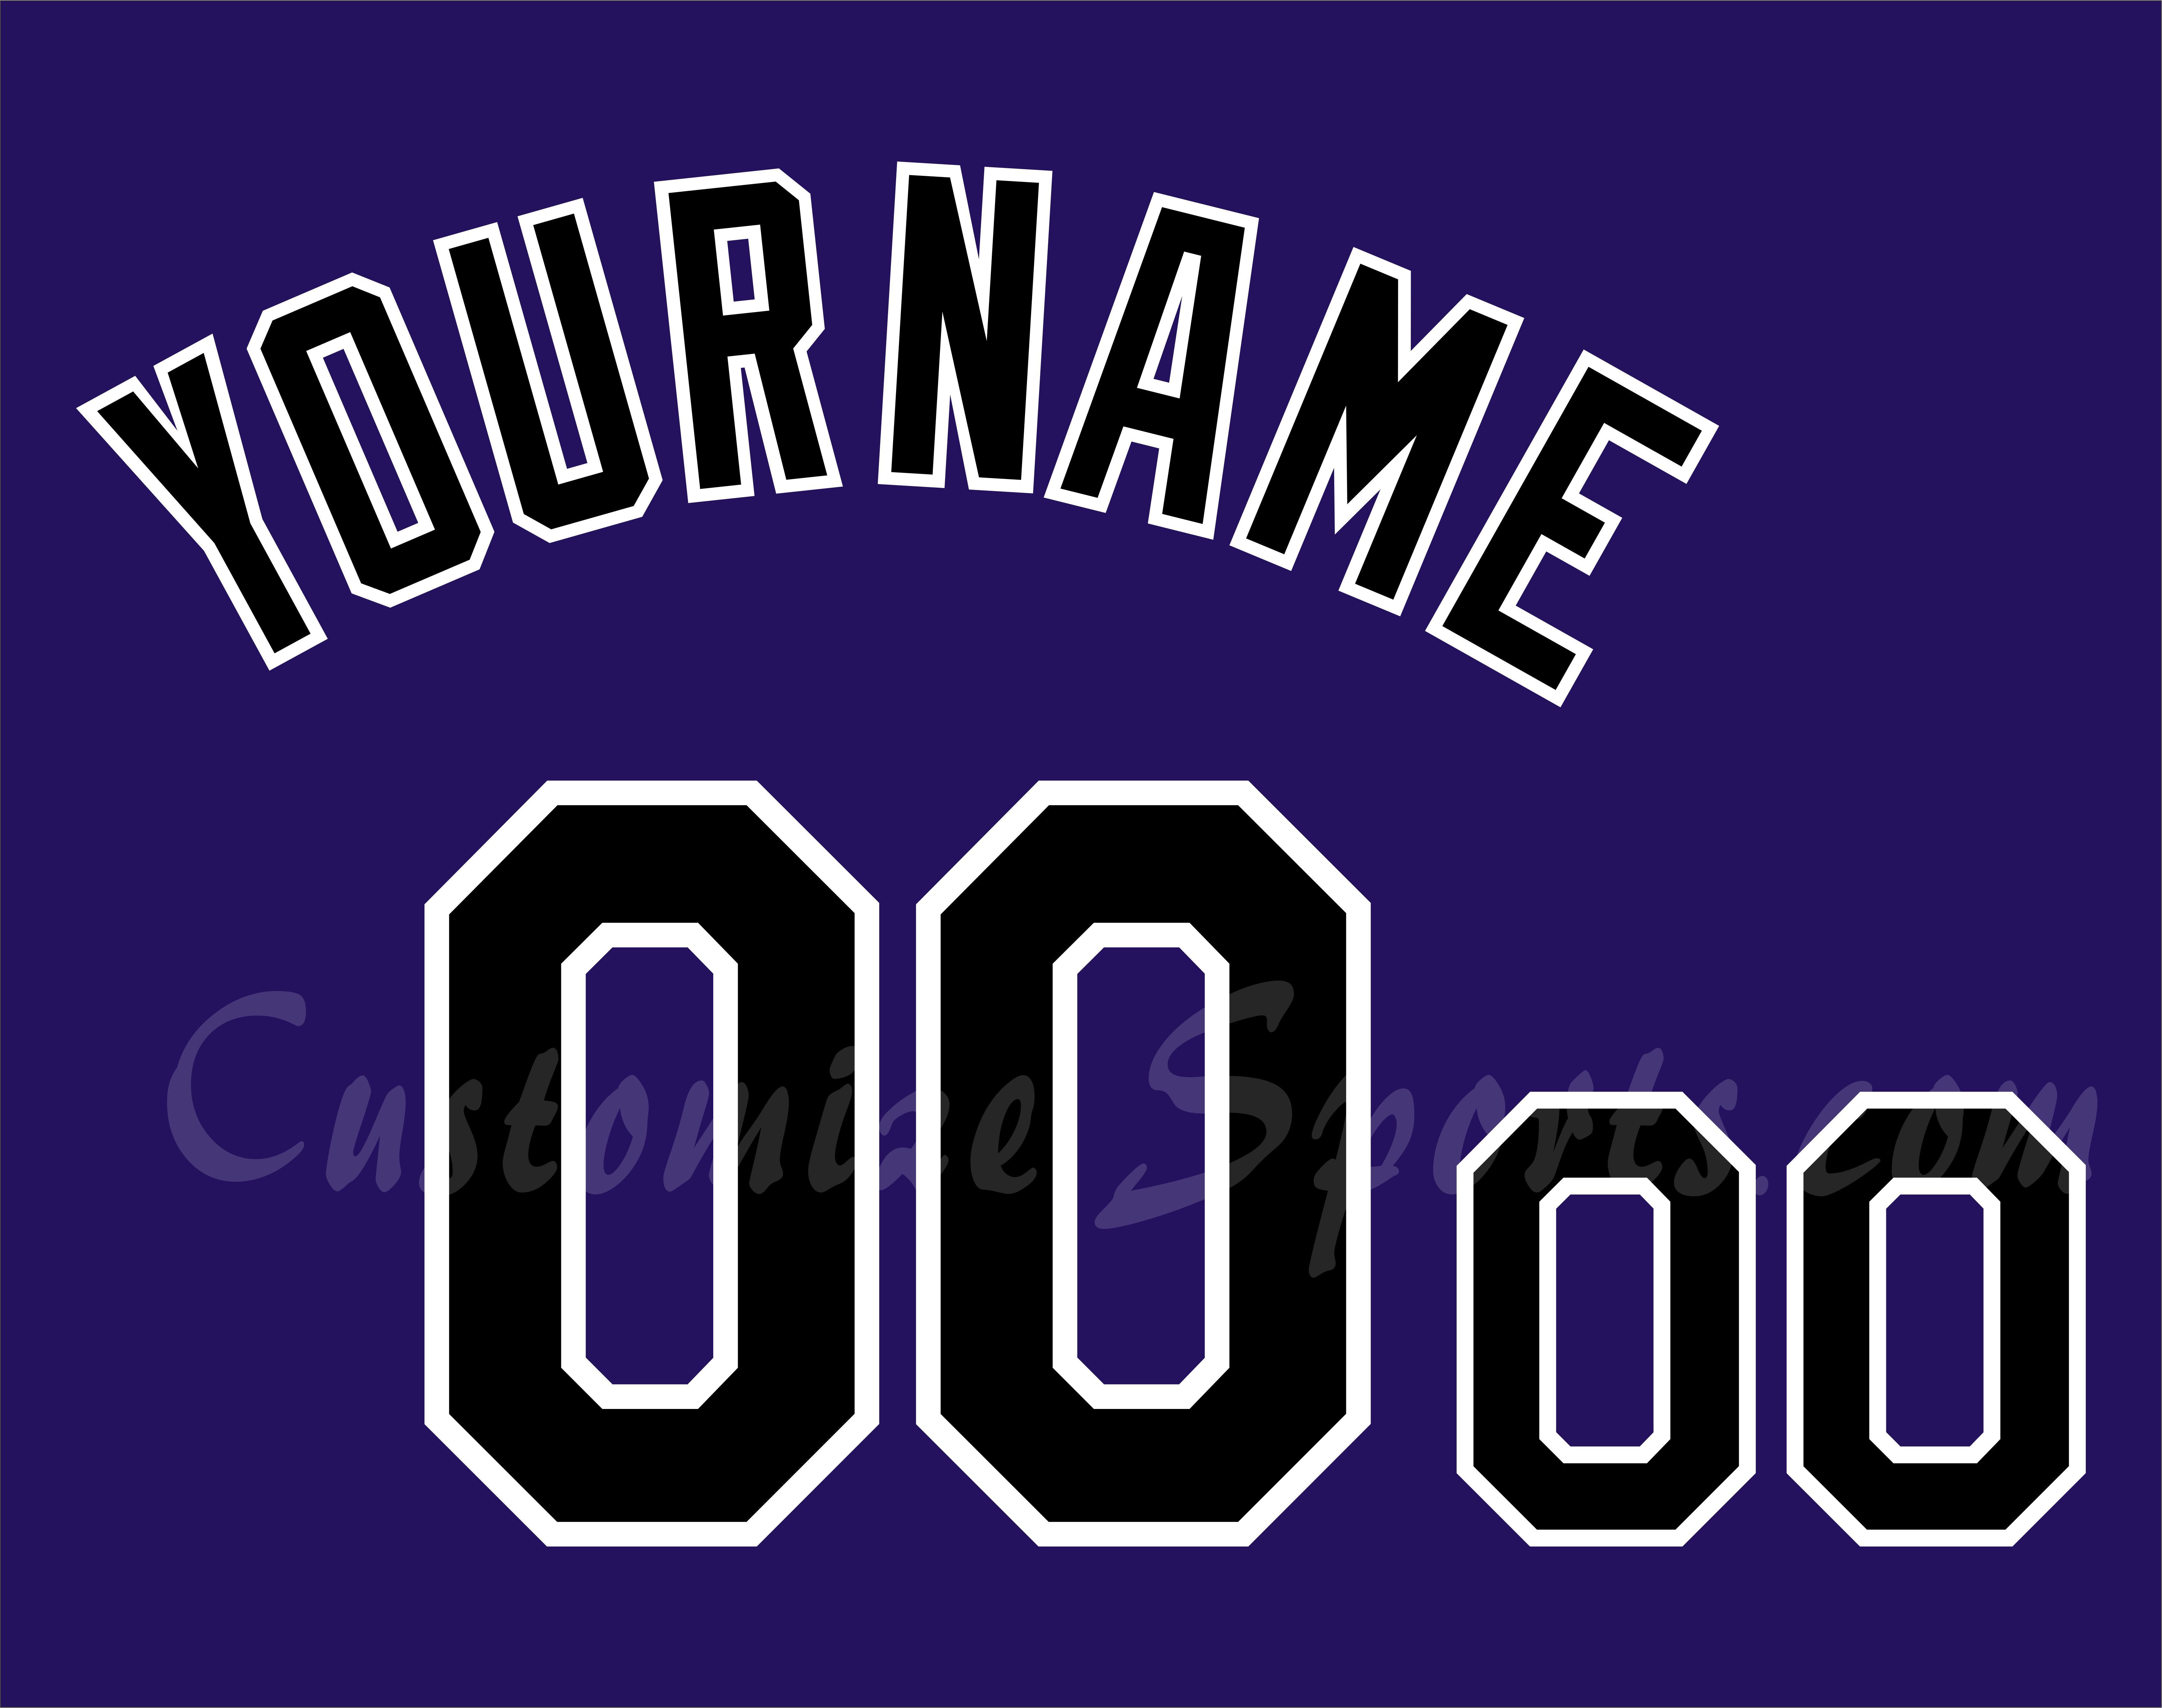 Colorado Rockies Jersey Poster Print Personalized Any NAME 